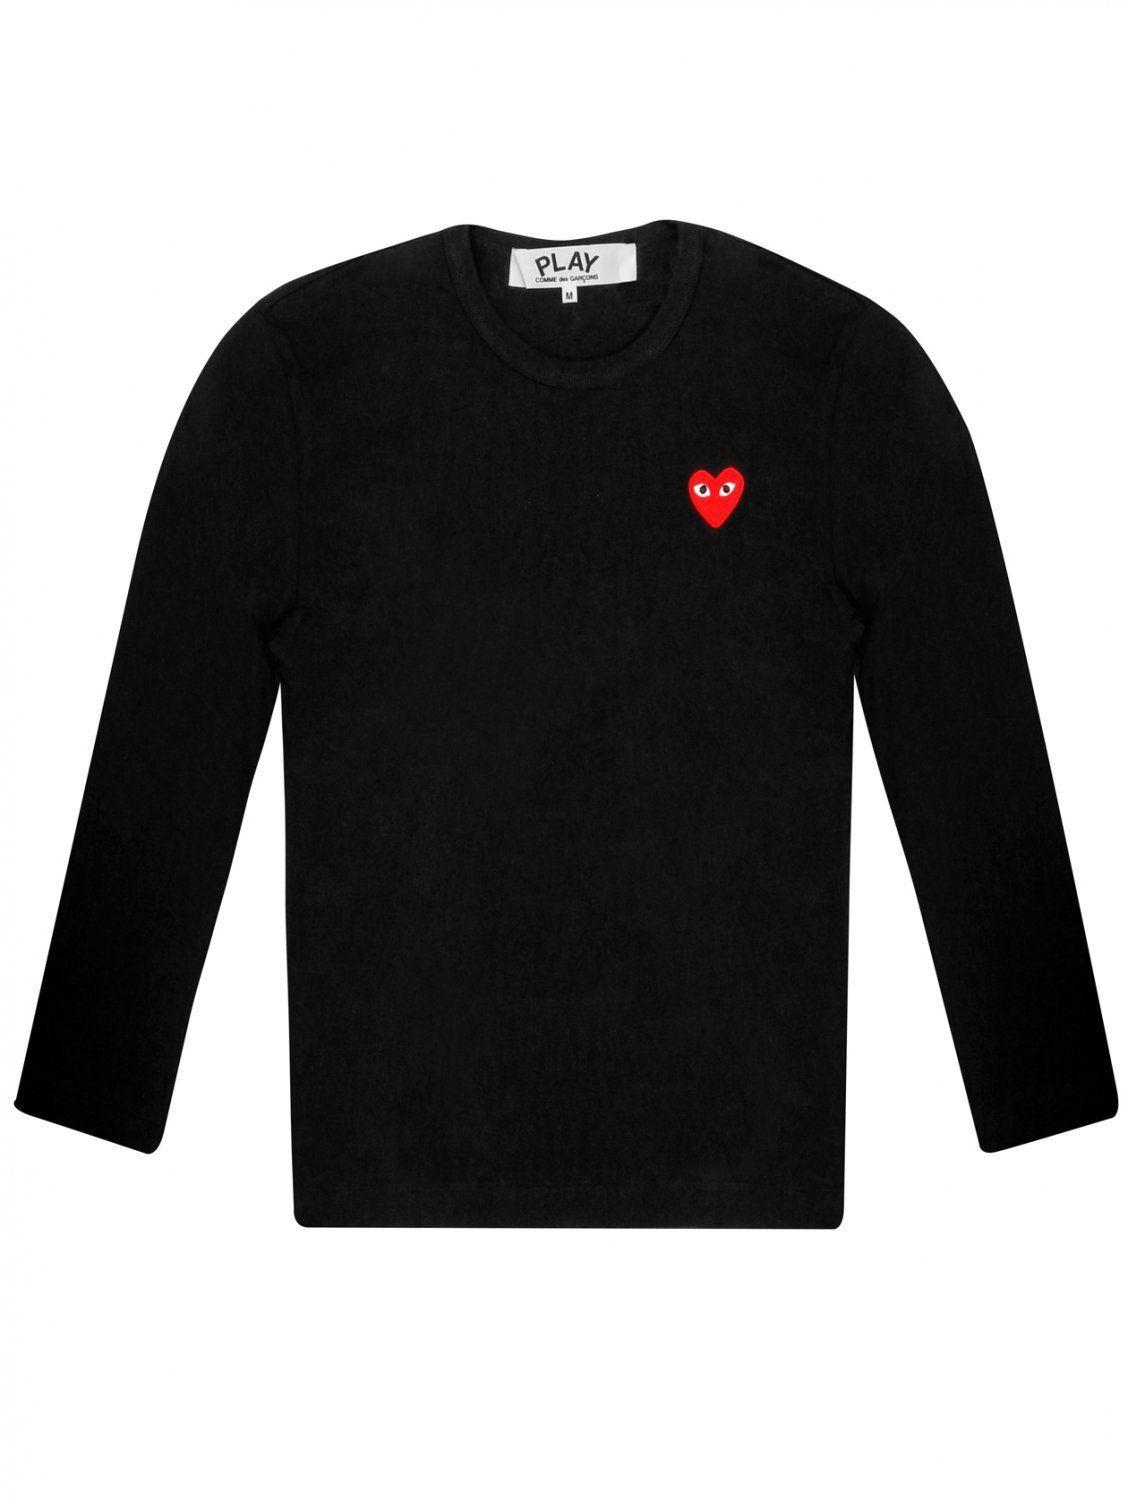 Black and Red Heart Logo - Comme Des Garcons Clothing. PLAY Ladies L S Red Heart Logo T Shirt